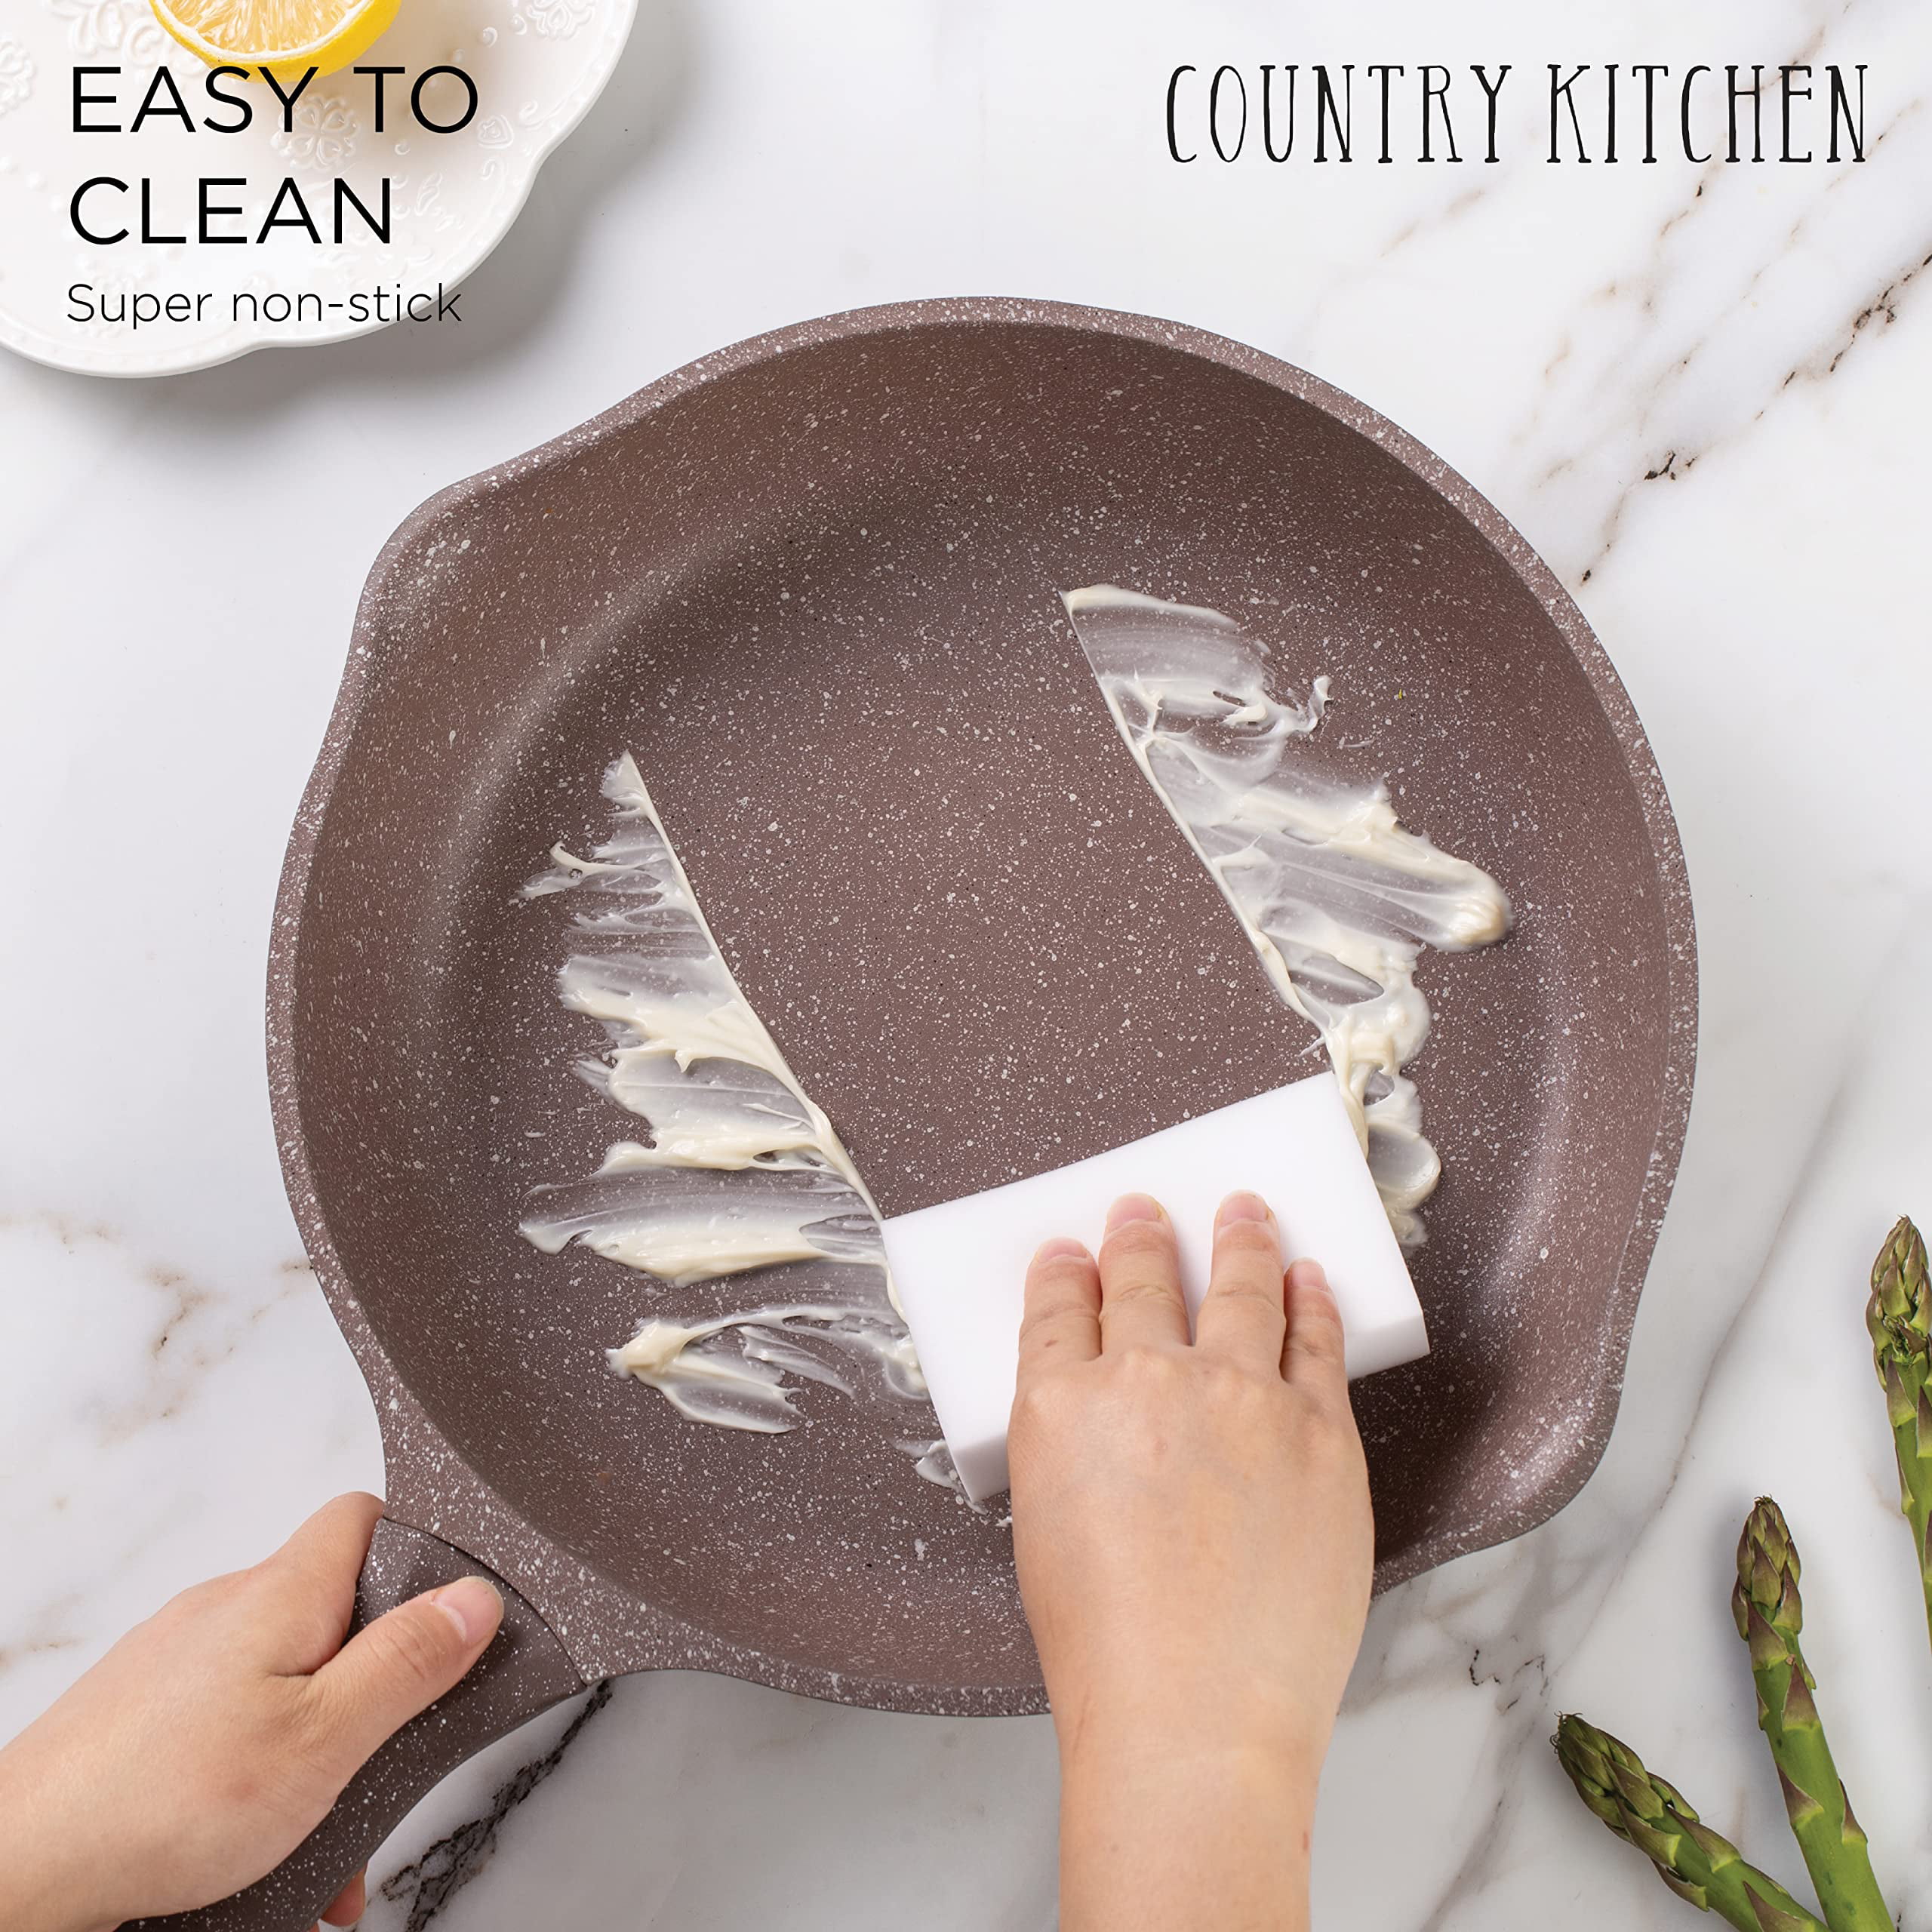 Country Kitchen country kitchen induction cookware sets - 8 piece